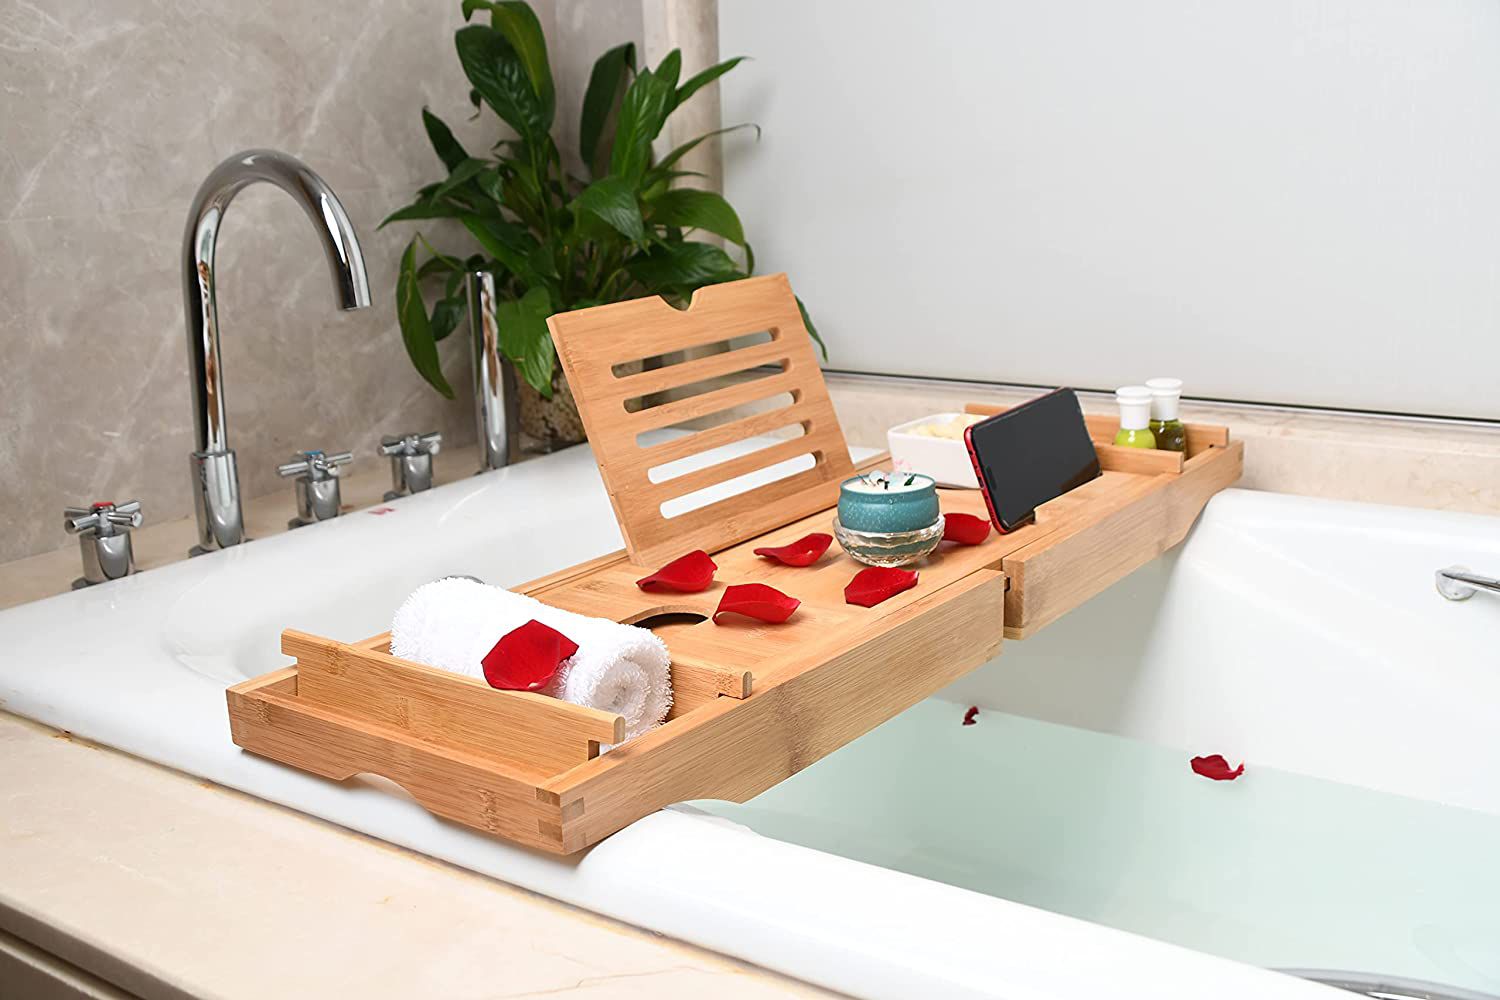 What-is-the-Best-Wood-for-a-Bath-Caddy